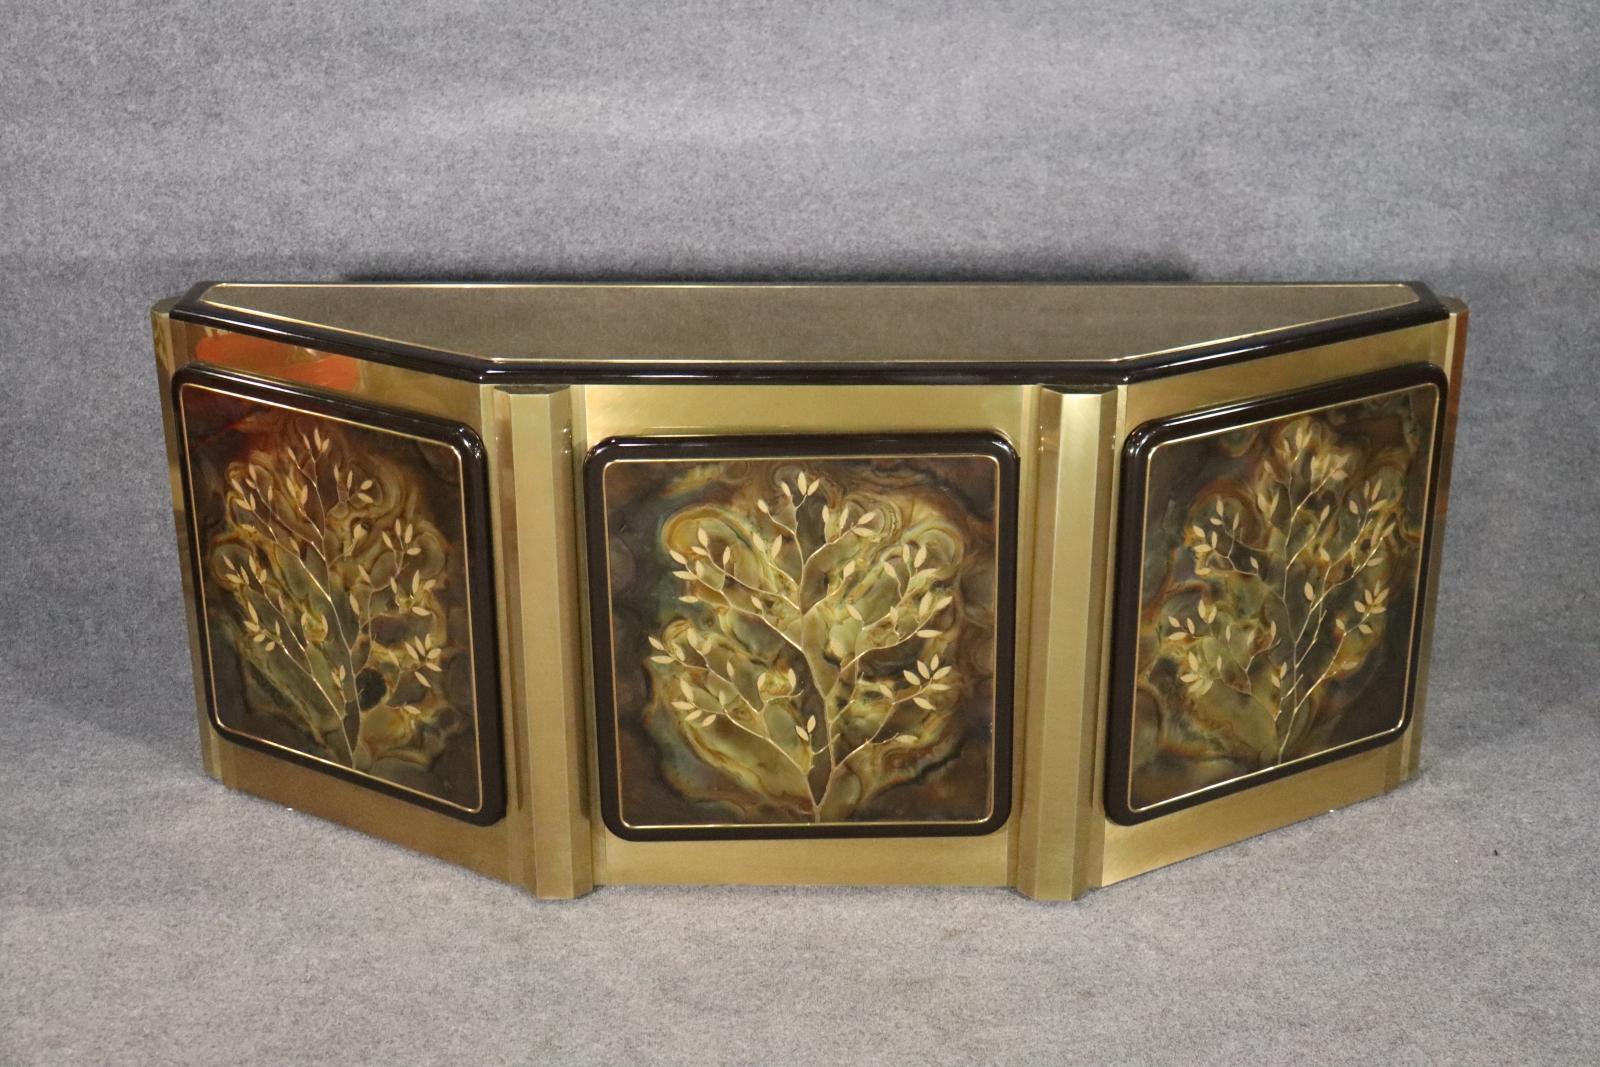 Etched brass panel doors with brass clad base. 3 doors containing 1 shelf. 30 1/8